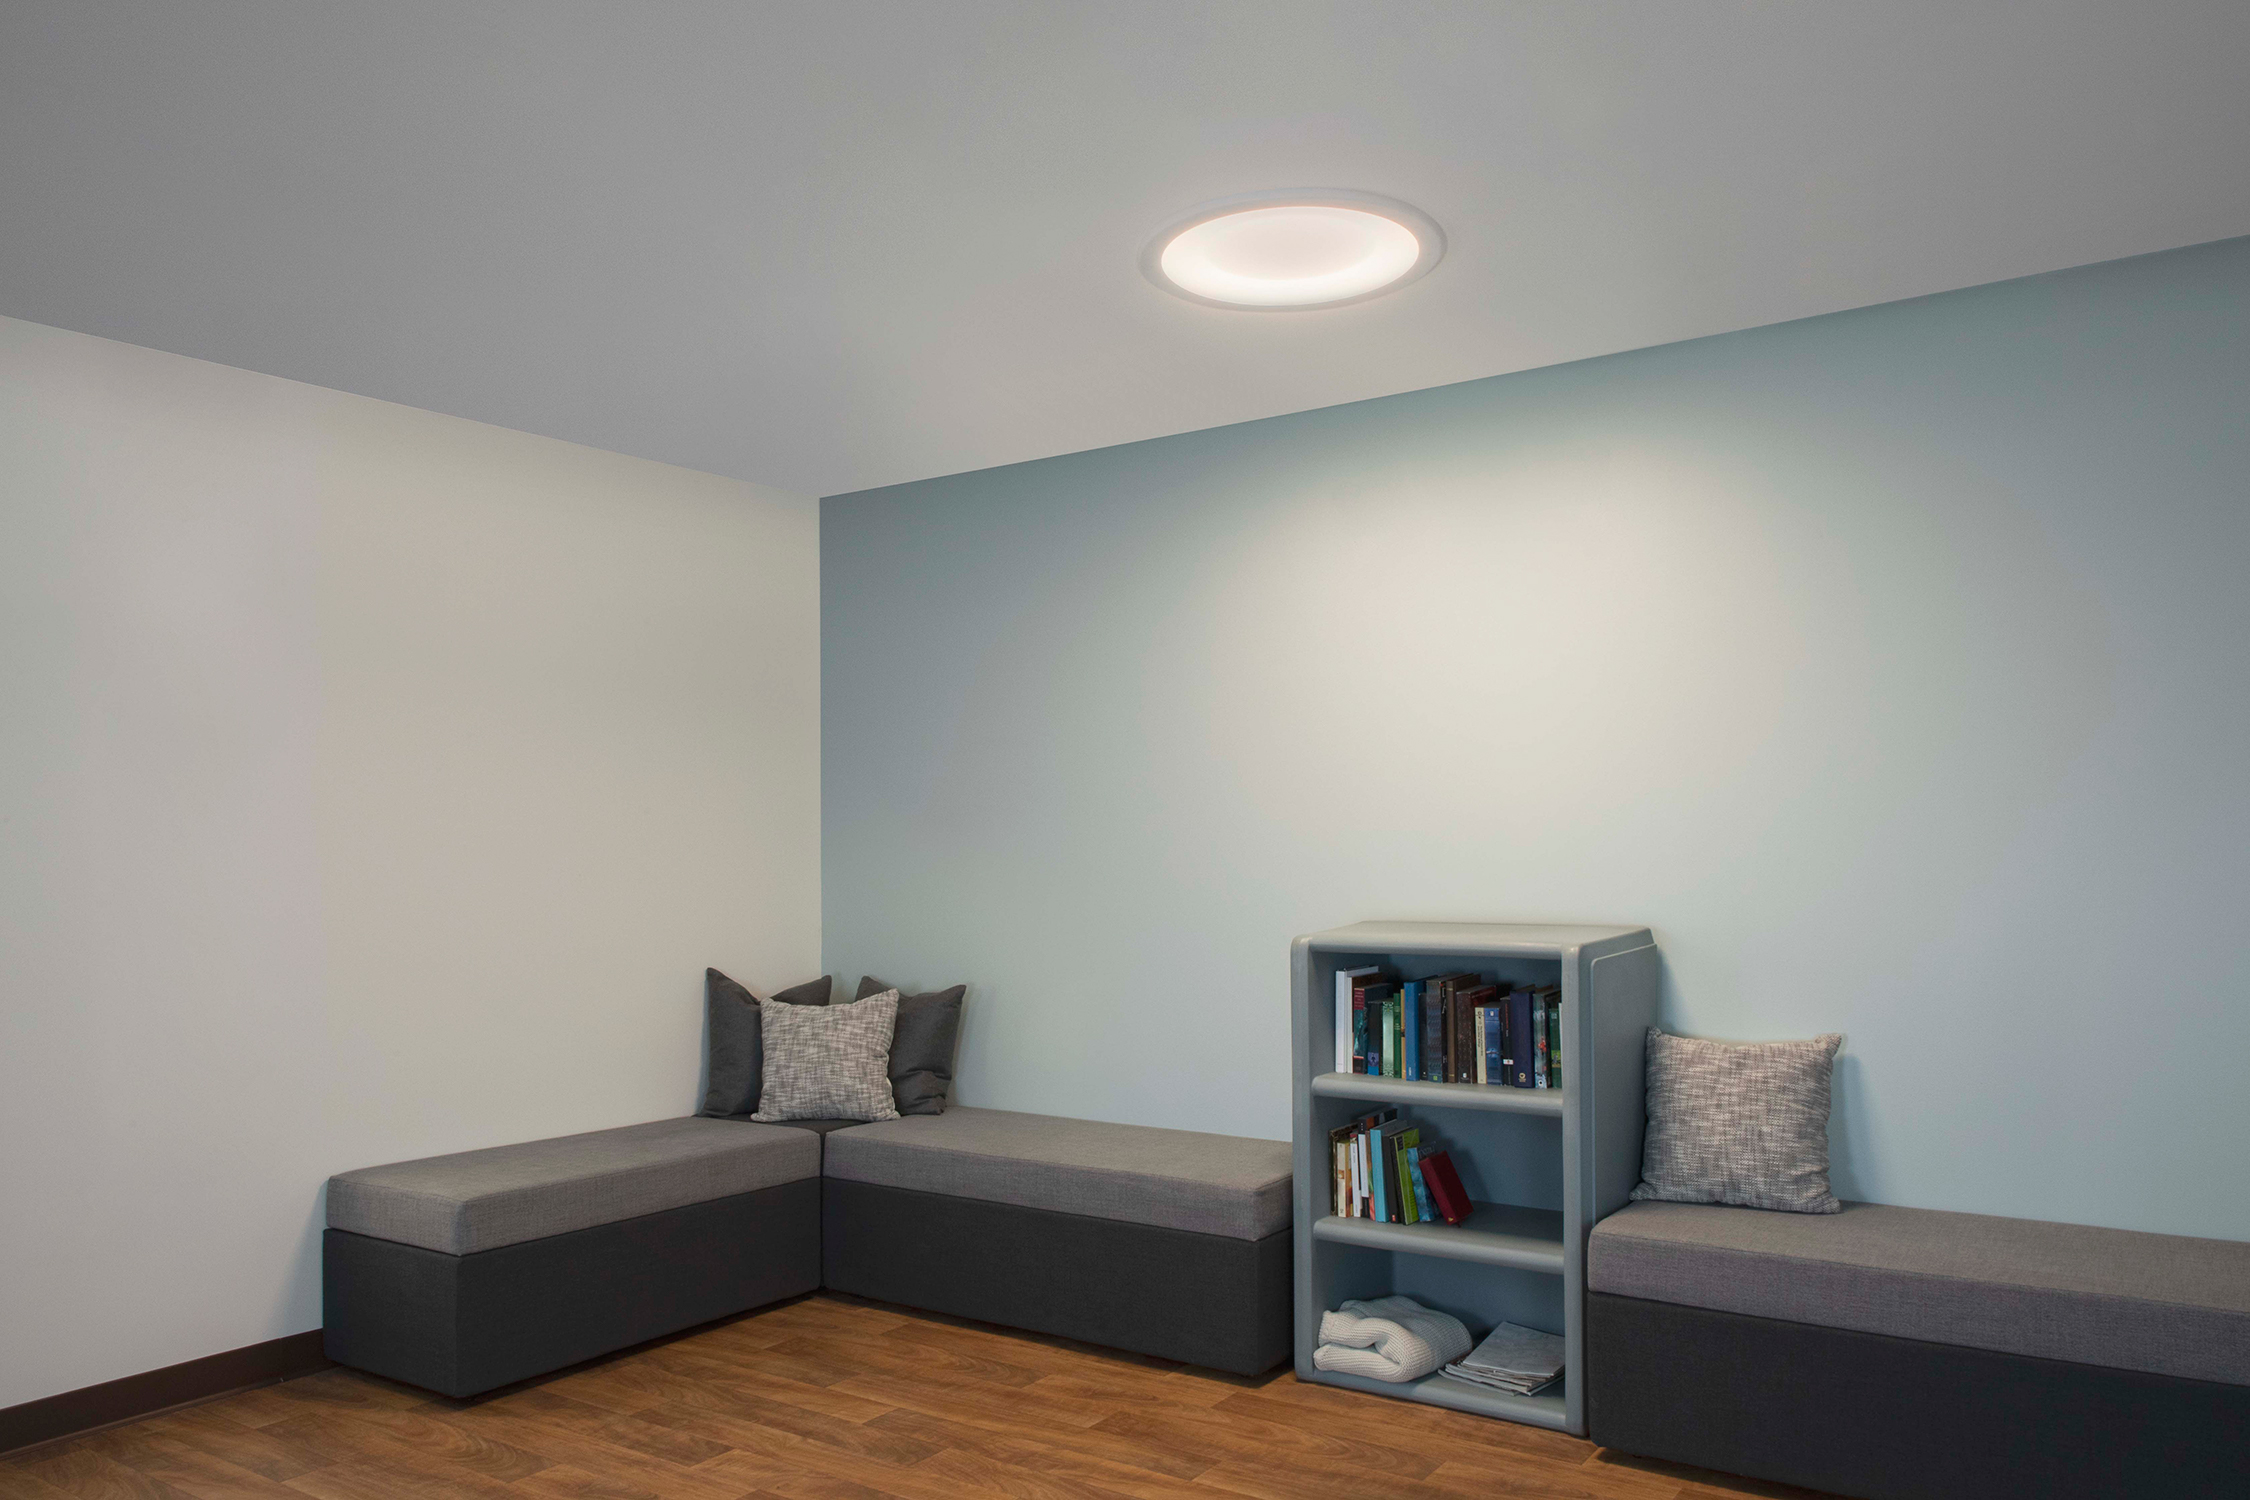 Symmetry ceiling luminaire in a behavioral health lounge area